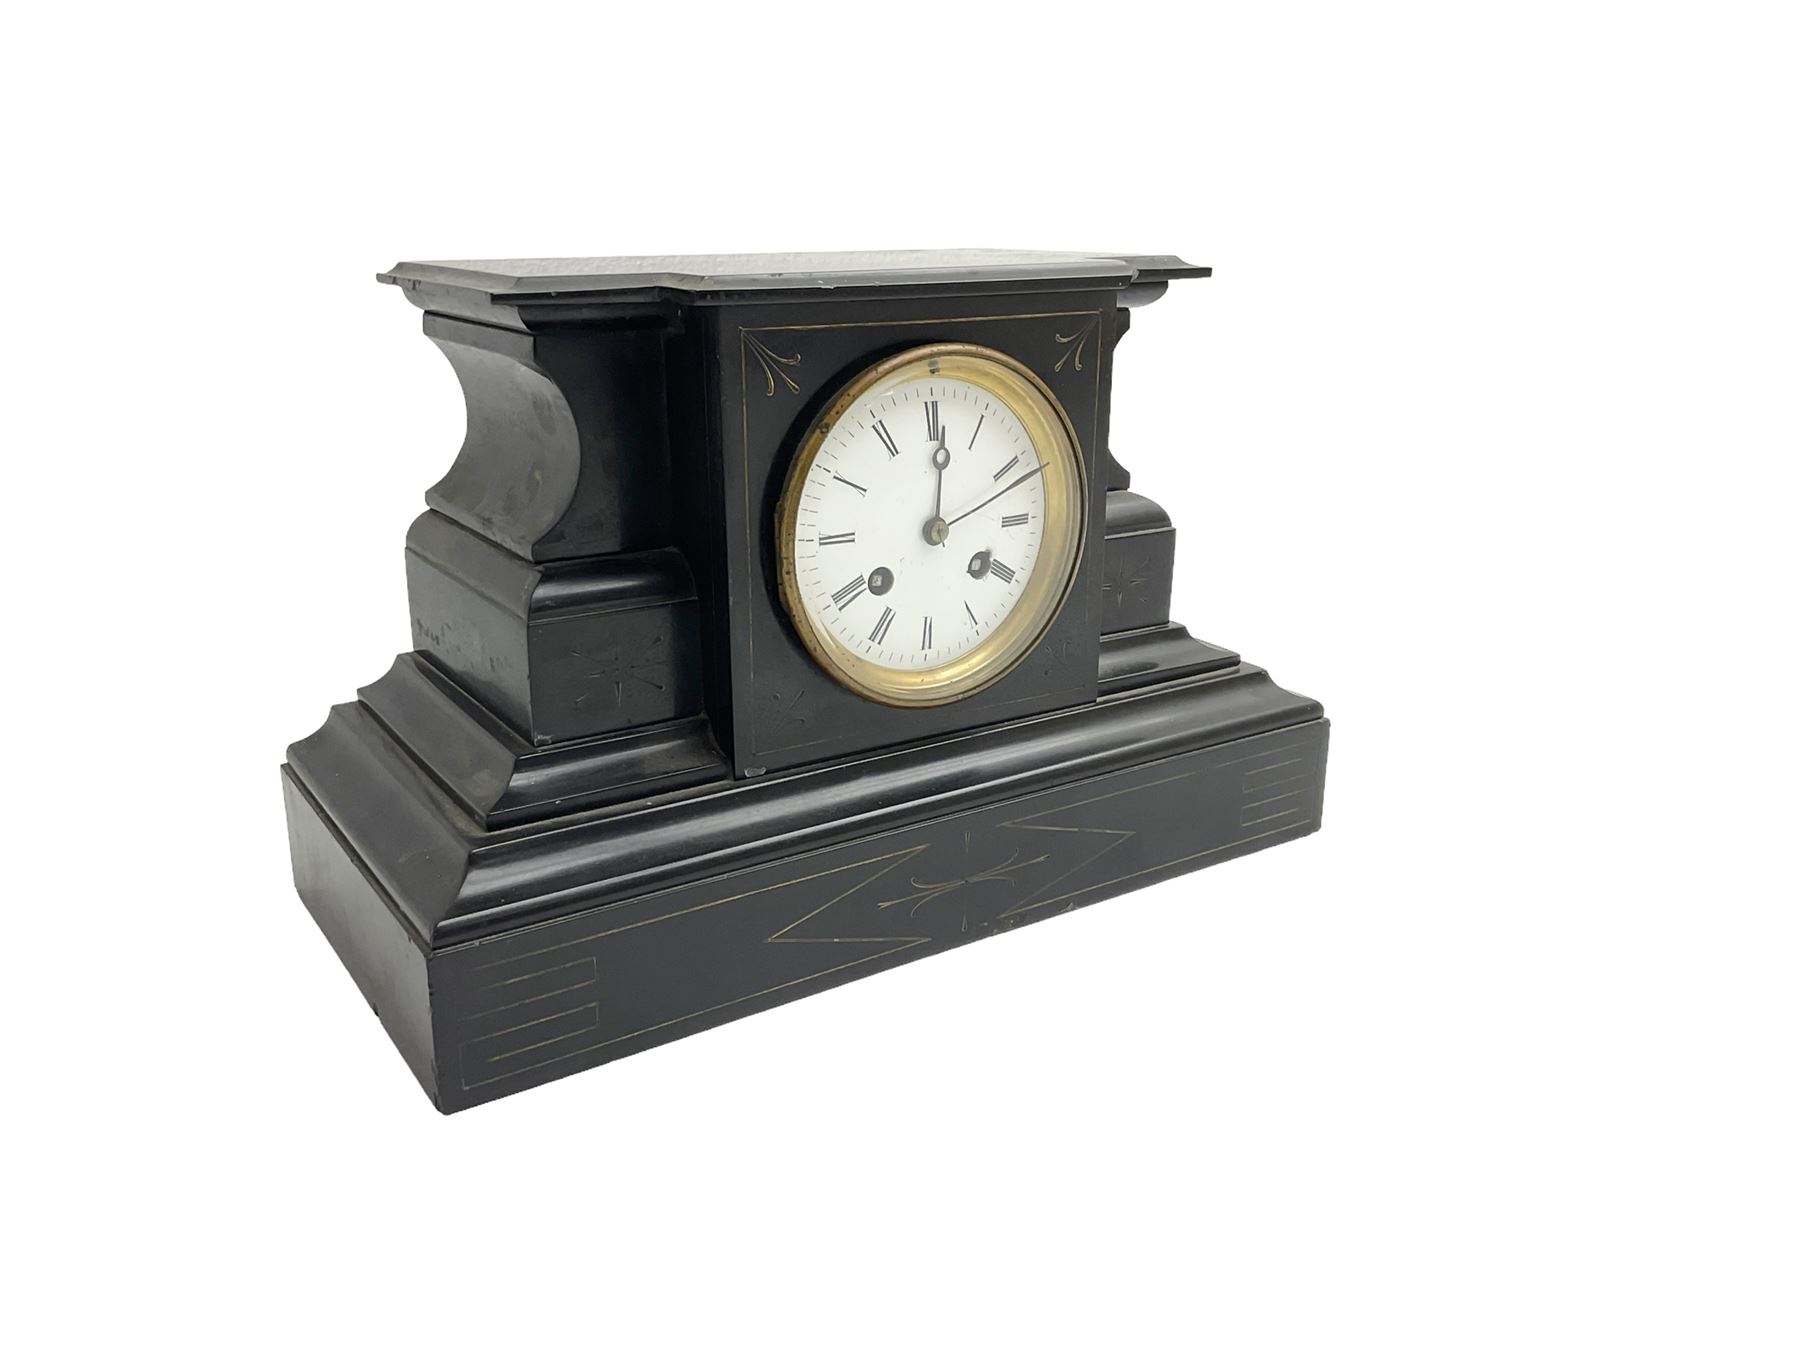 French - 19th century Belgium slate mantle clock with an 8-day Parisian movement - Image 2 of 4